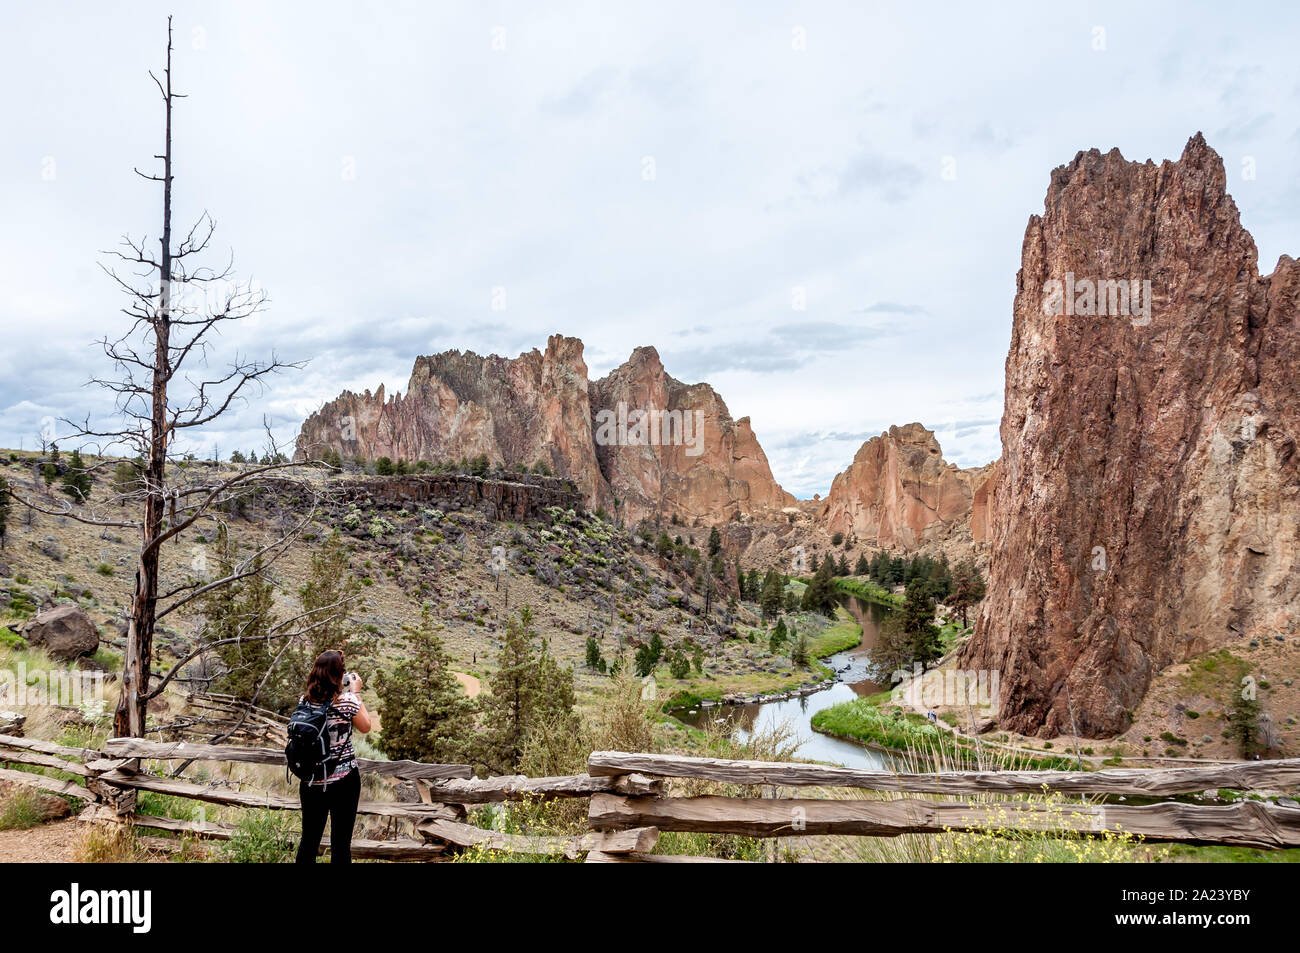 At Smith Rock State Park in Central Oregon, a woman hiker stops to take a photo of the steep rock faces towering above the river. Stock Photo